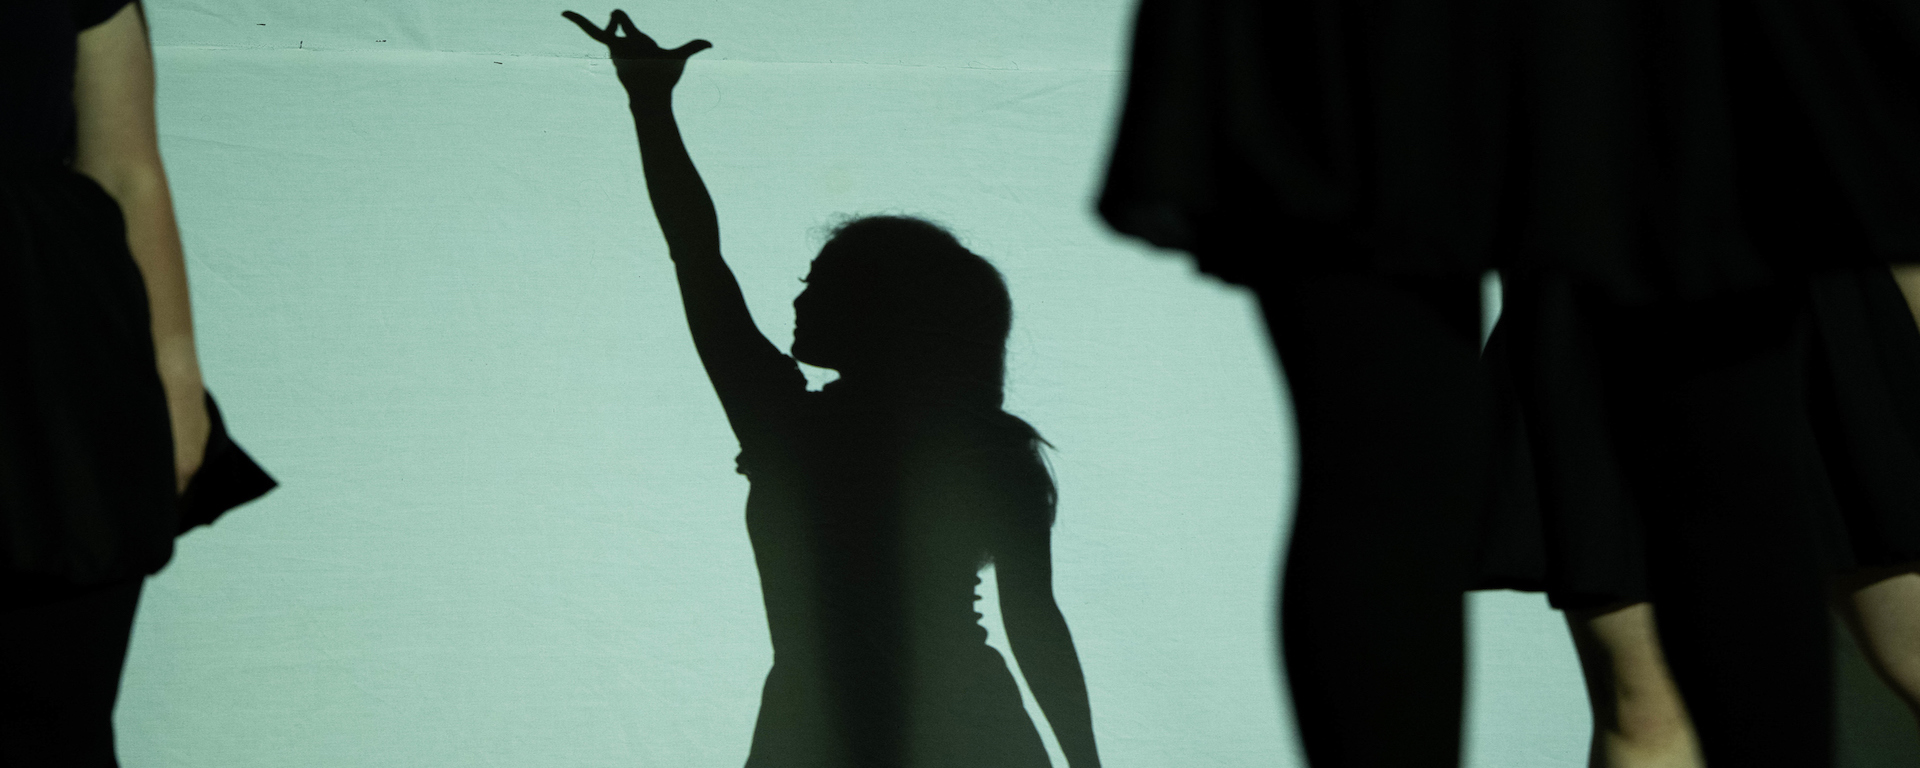 Dancer in silhouette with arm stretched high